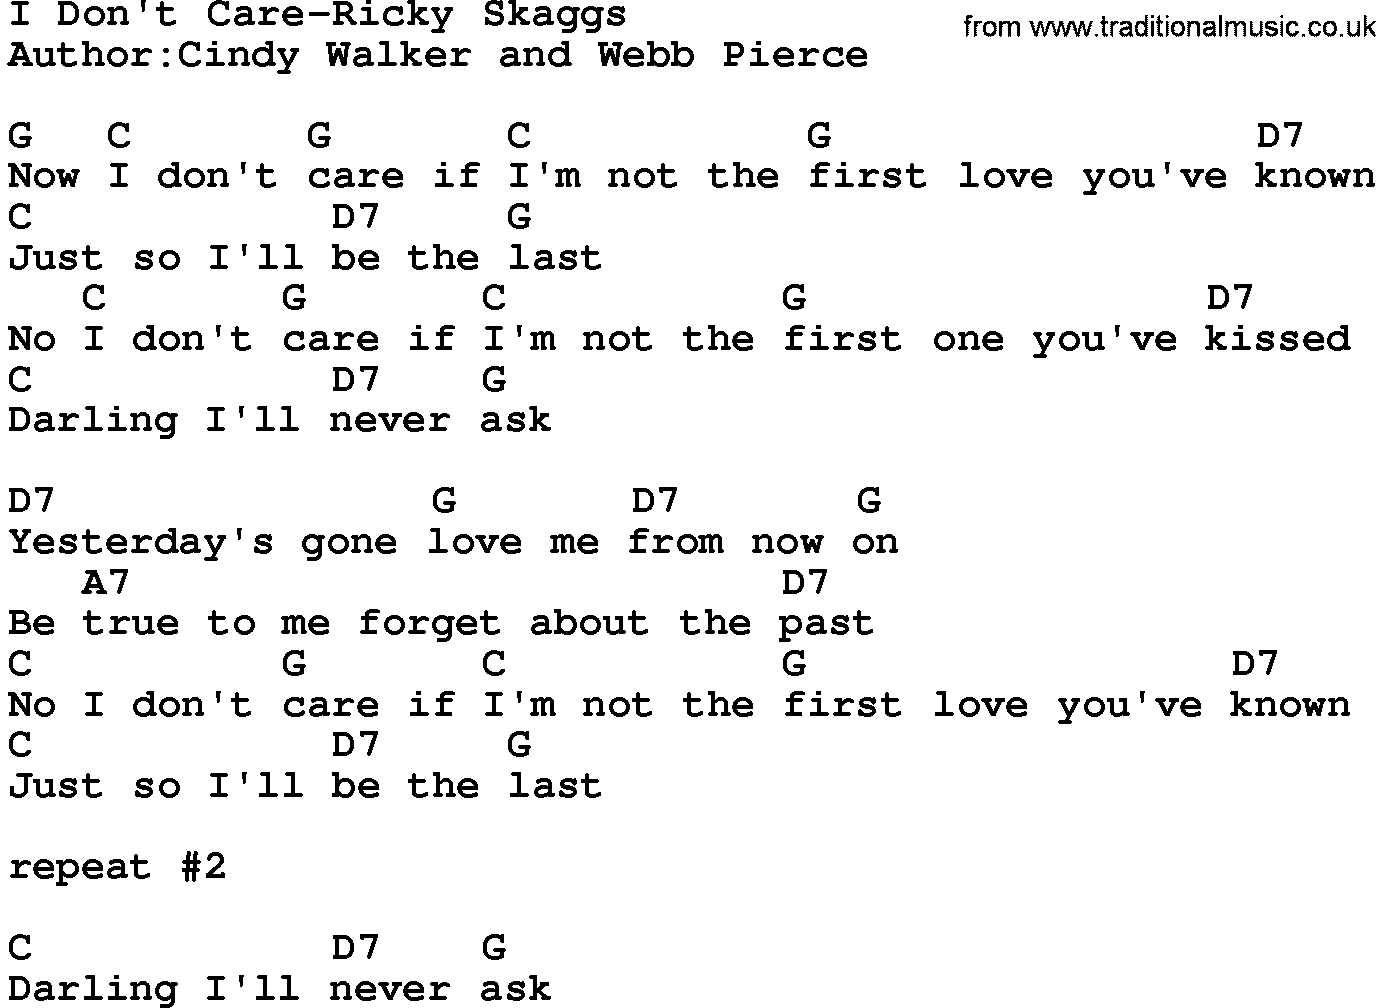 Country music song: I Don't Care-Ricky Skaggs lyrics and chords